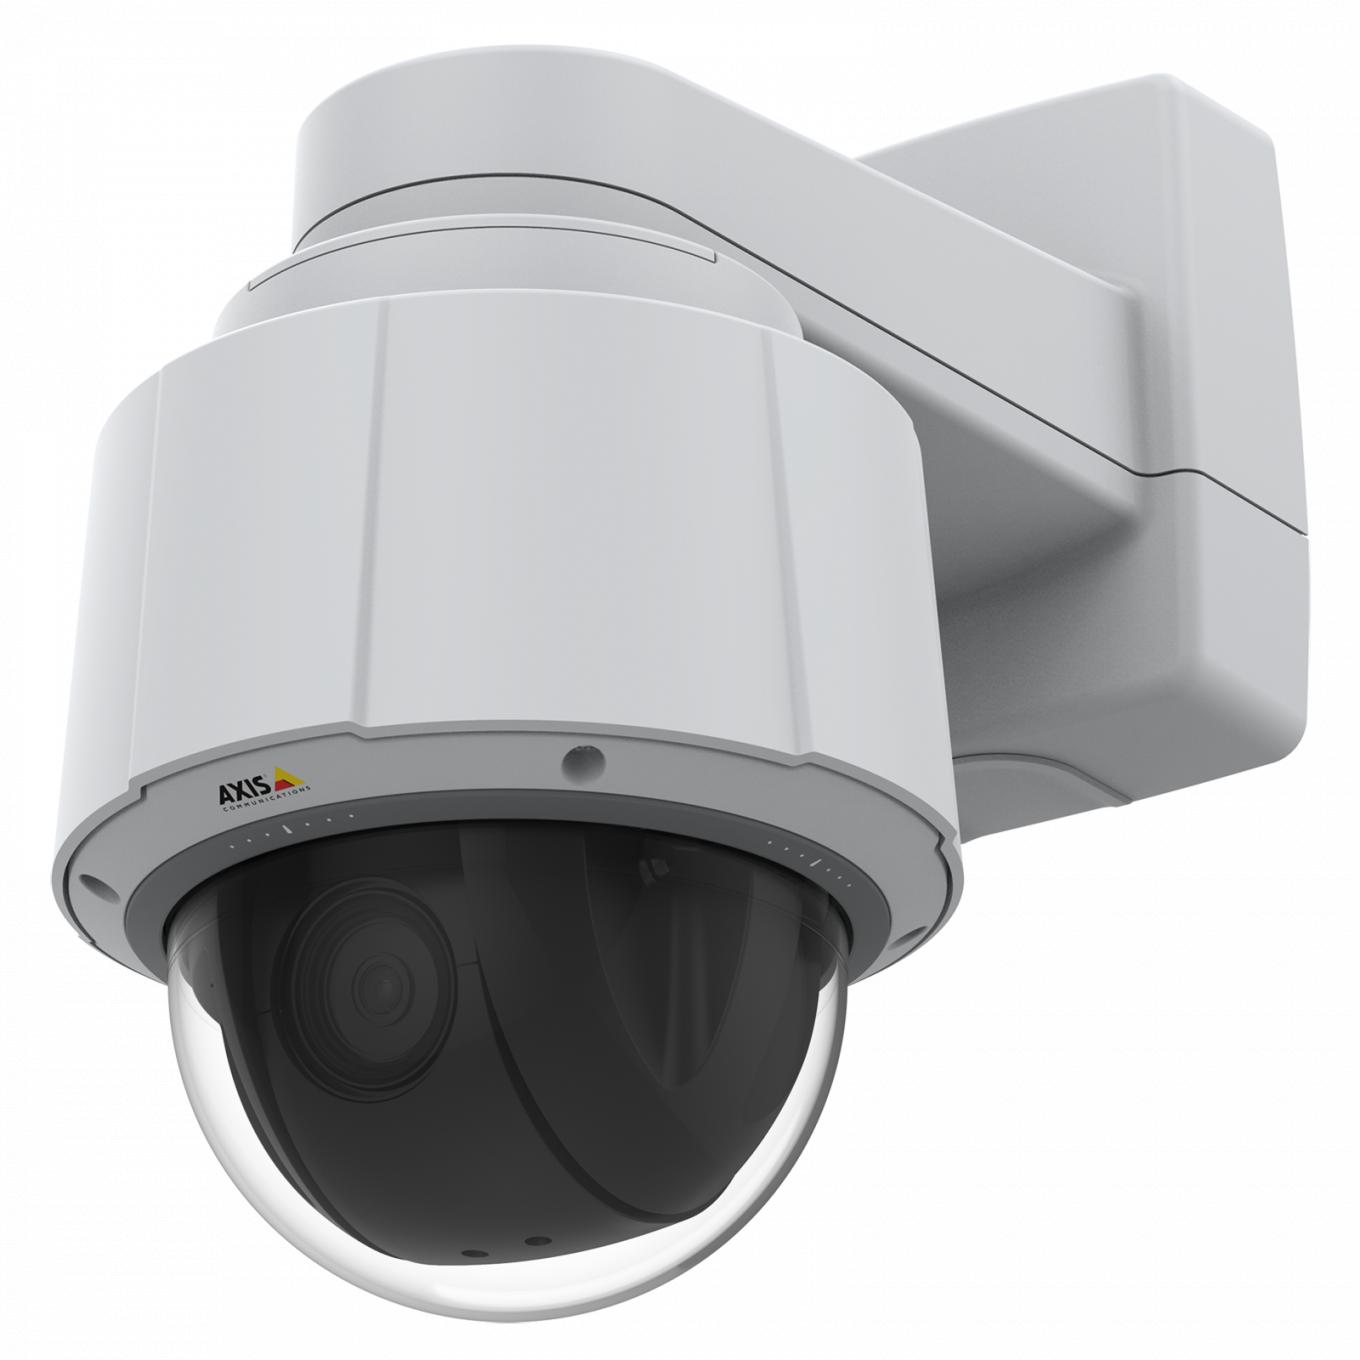 Axis IP Camera Q6075  is TPM, FIPS 140-2 level 2 certified and Built-in analytics